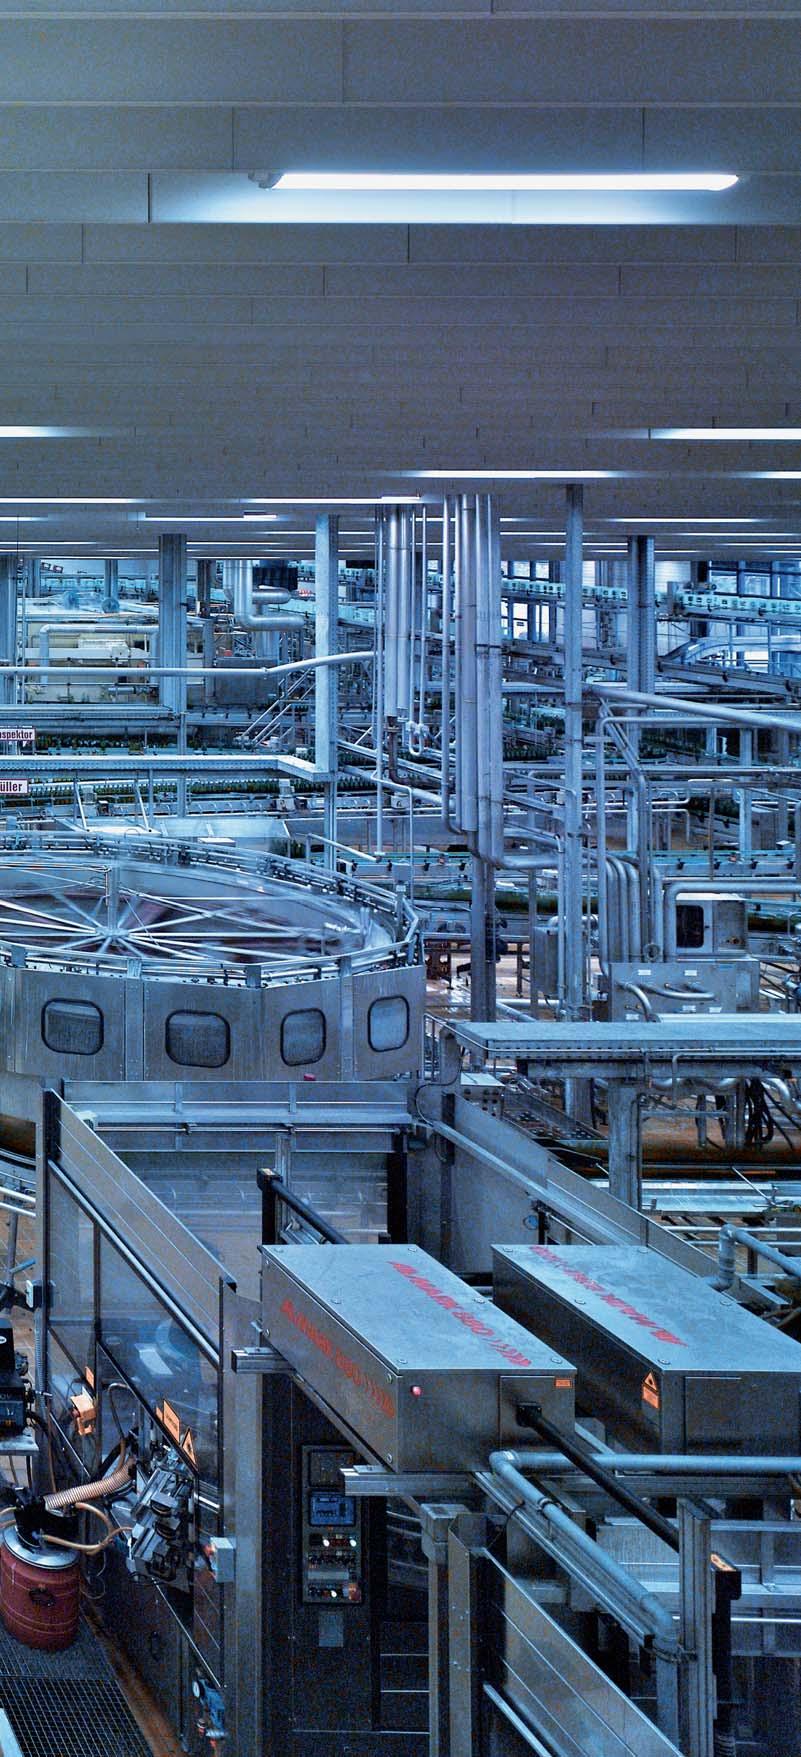 Facts & figures For the past 160 years, Siemens has been at the forefront of innovation and technology.